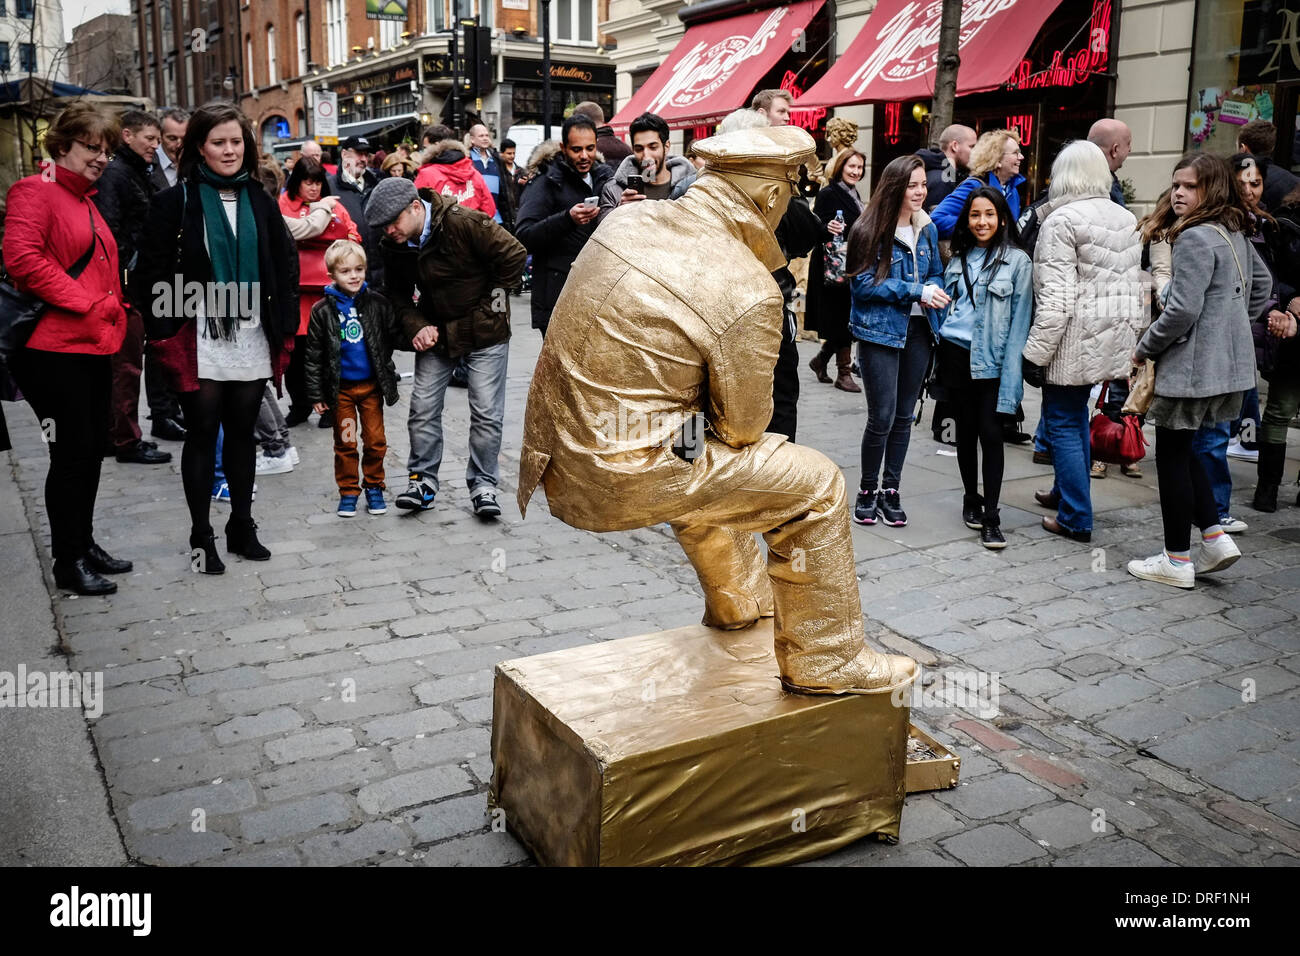 A street entertainer at Covent Garden. Stock Photo